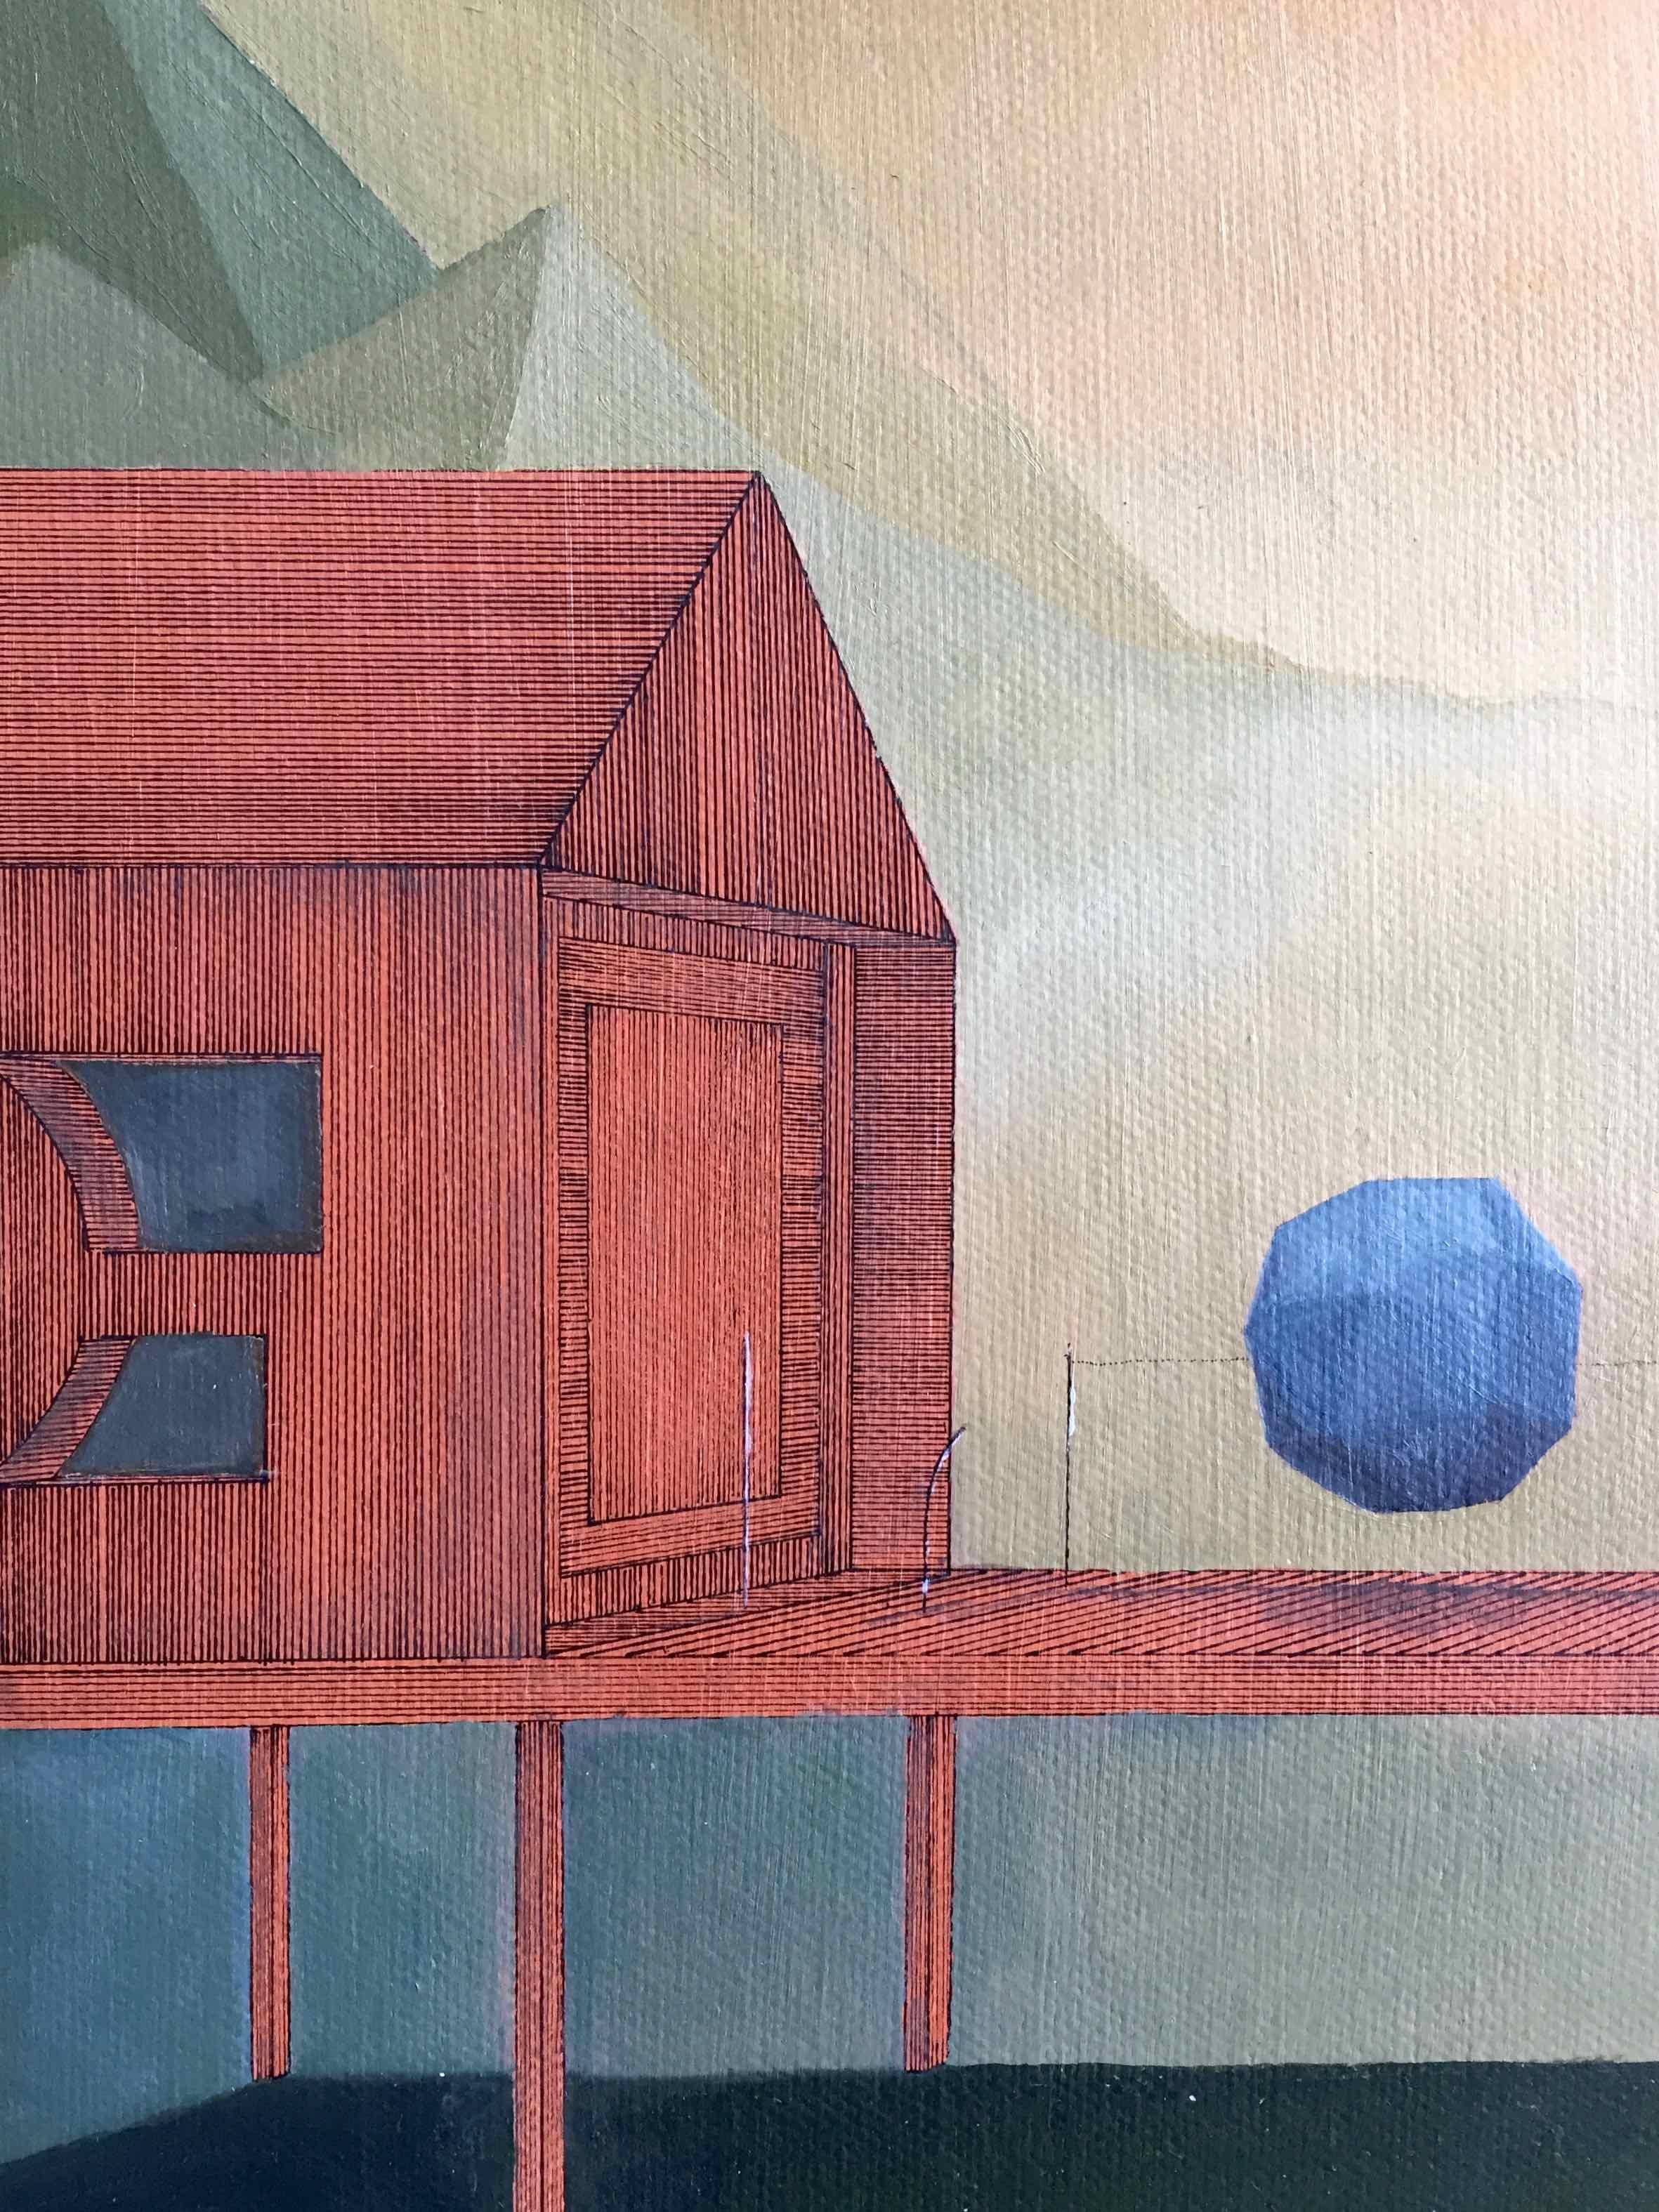 Placement: Round Perspective Drawing/Painting about Imaginary Spaces - Contemporary Art by Joella Wheatley